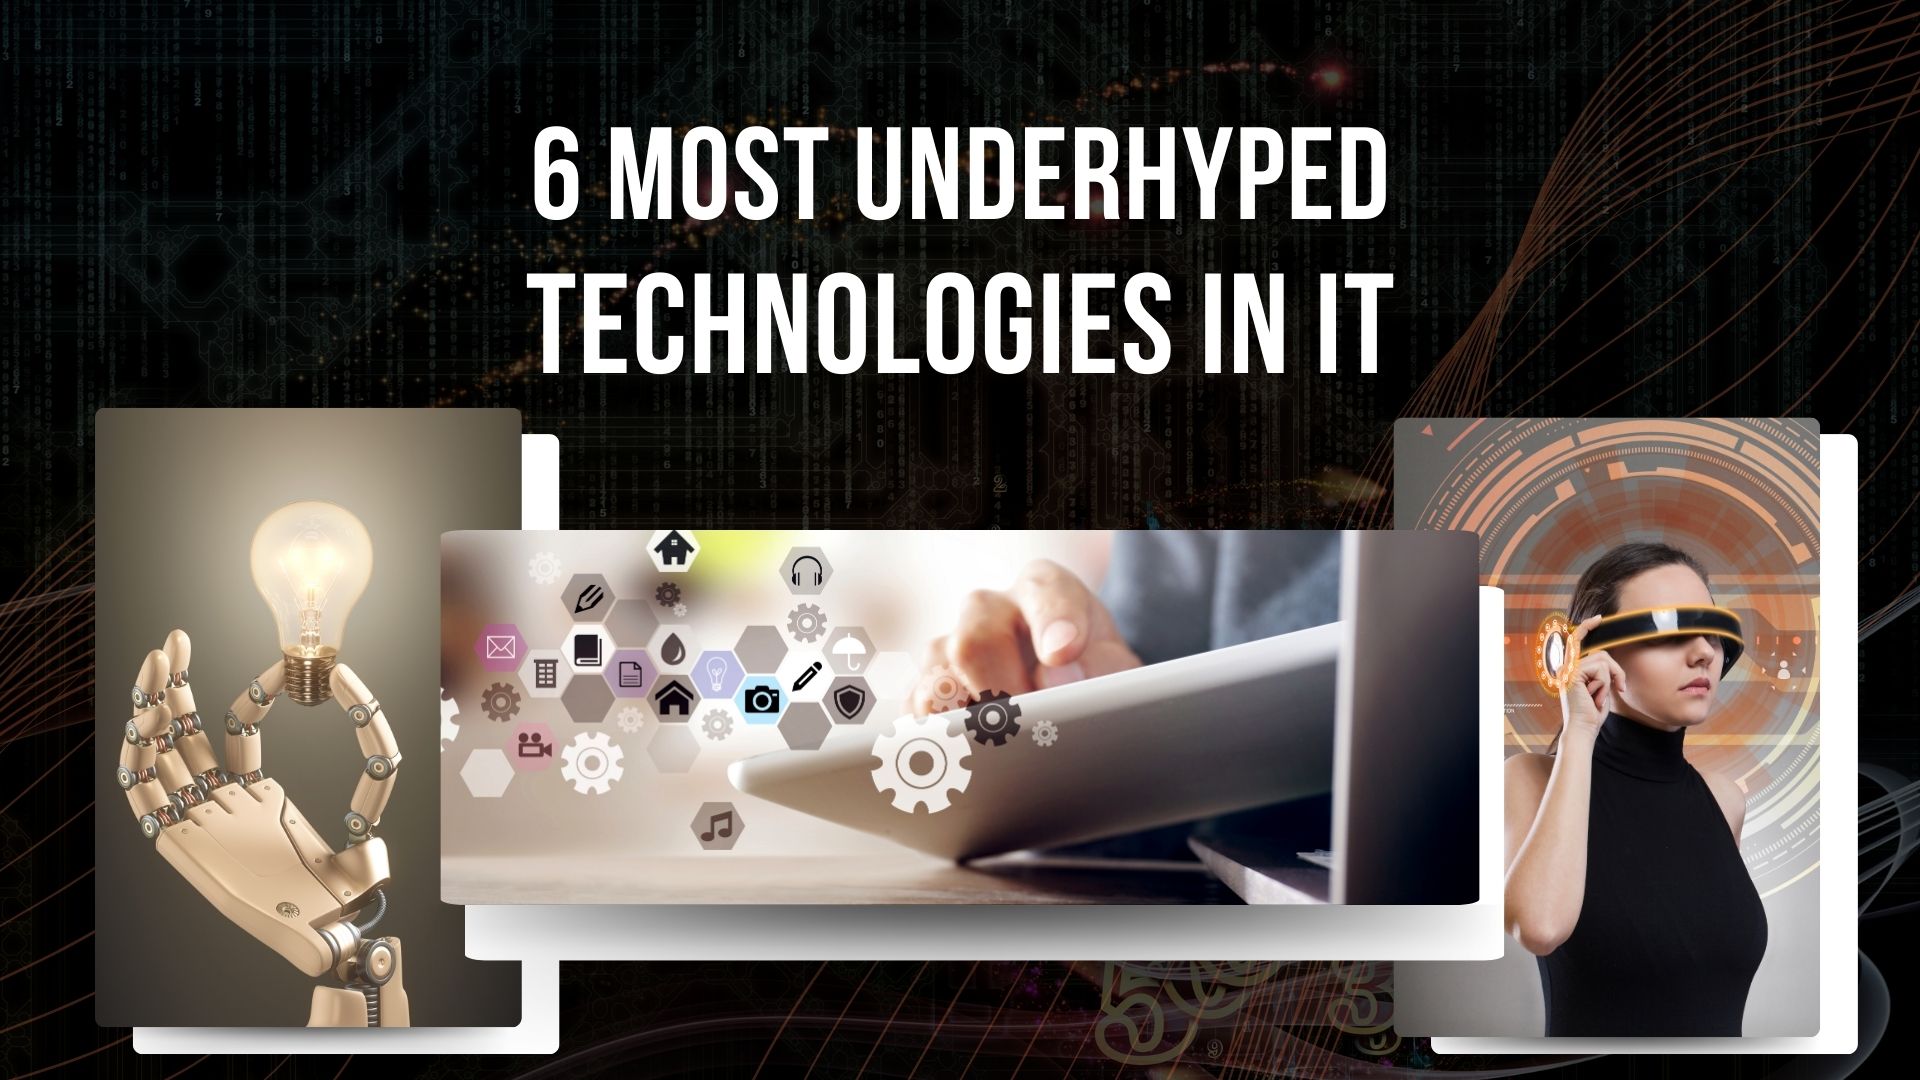 The 6 Most Underhyped Technologies in IT